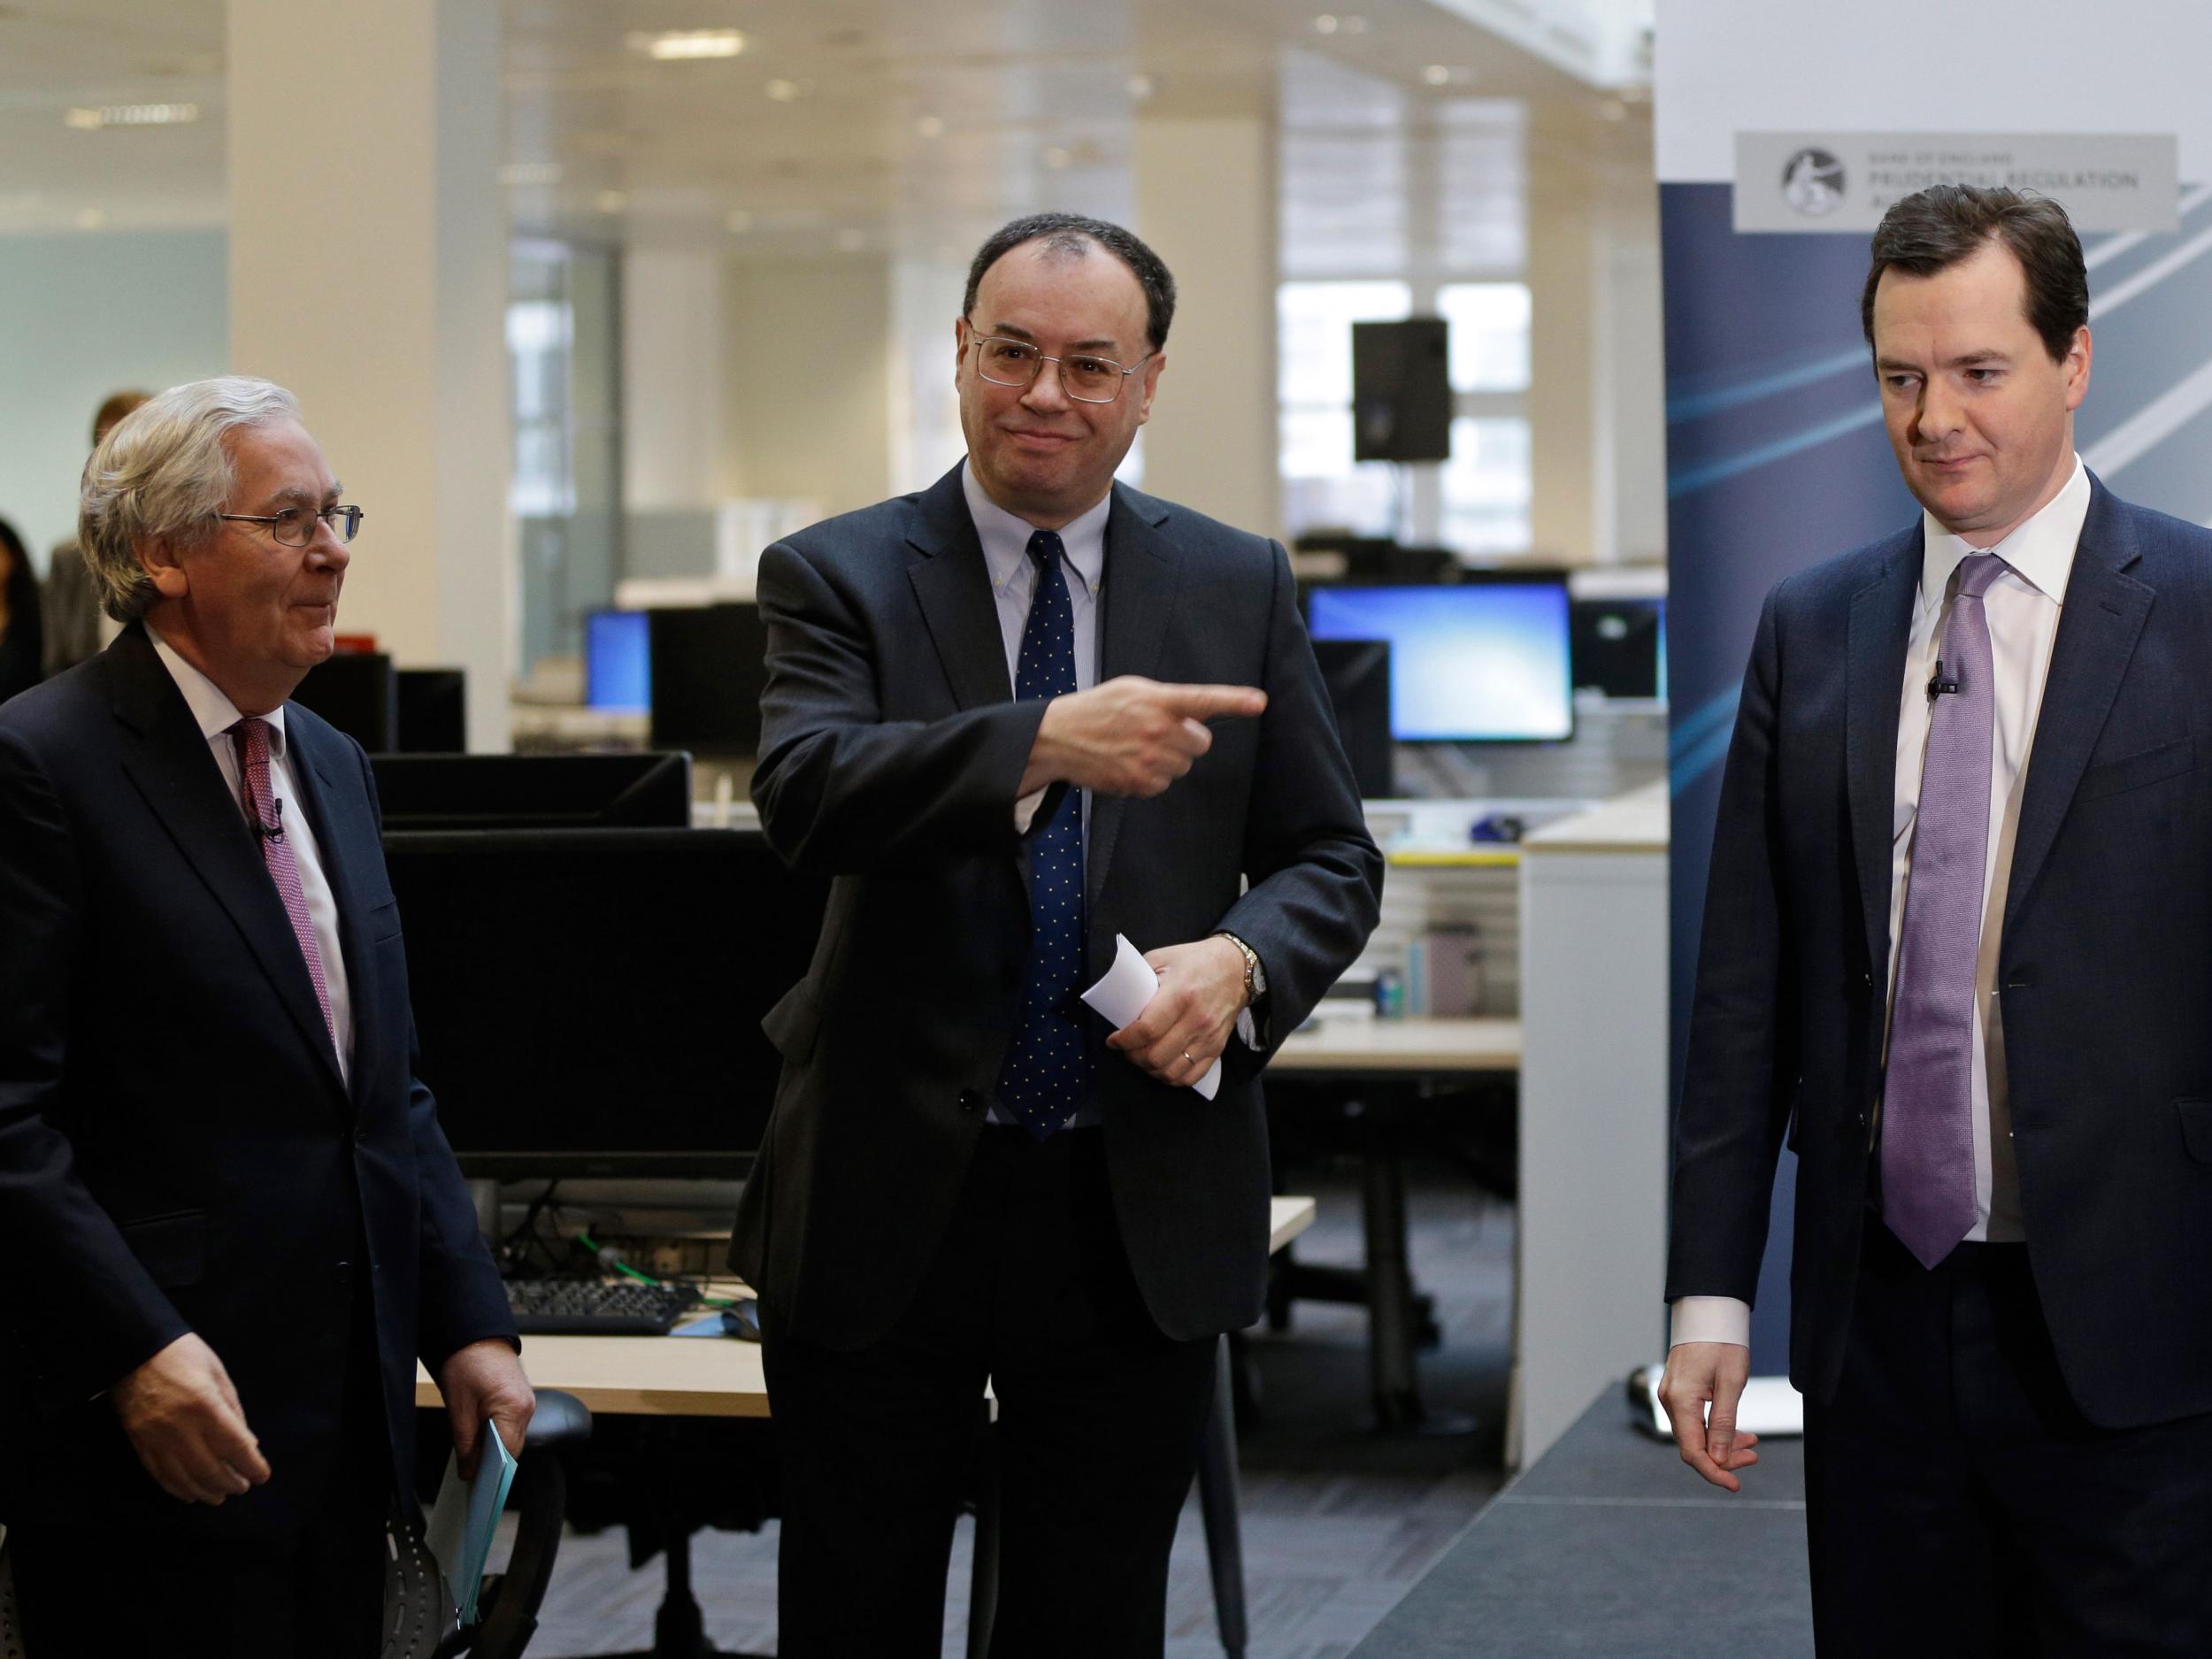 Andrew Bailey, center, the new chief executive of the FCA, points to the exit next to the Chancellor of the Exchequer George Osborne and the Governor of the Bank of England Mervyn King during the opening of the PRA